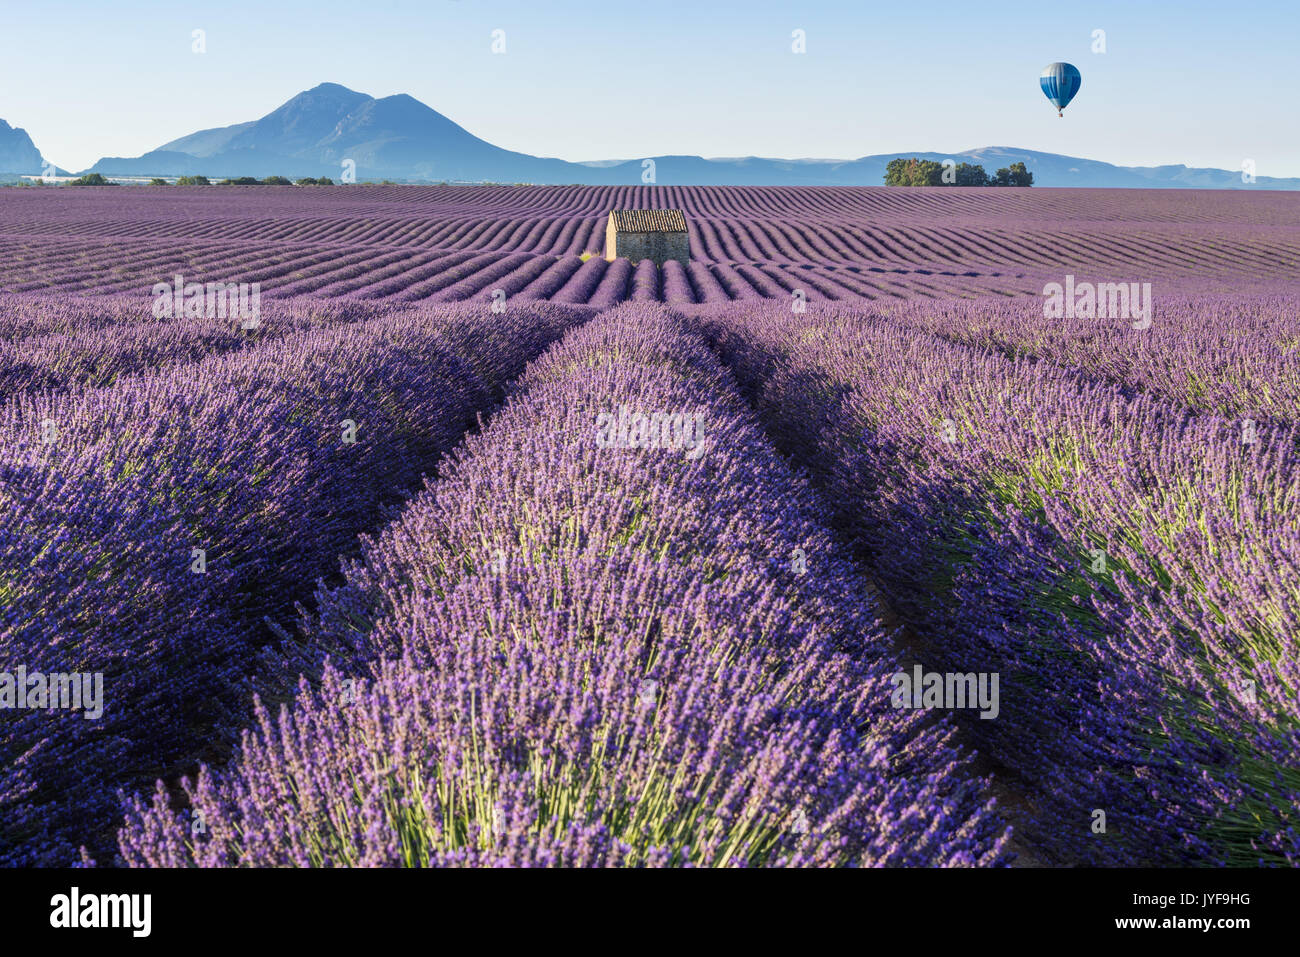 Hot air balloon over Lavender fields of Valensole. Provence, France Stock Photo